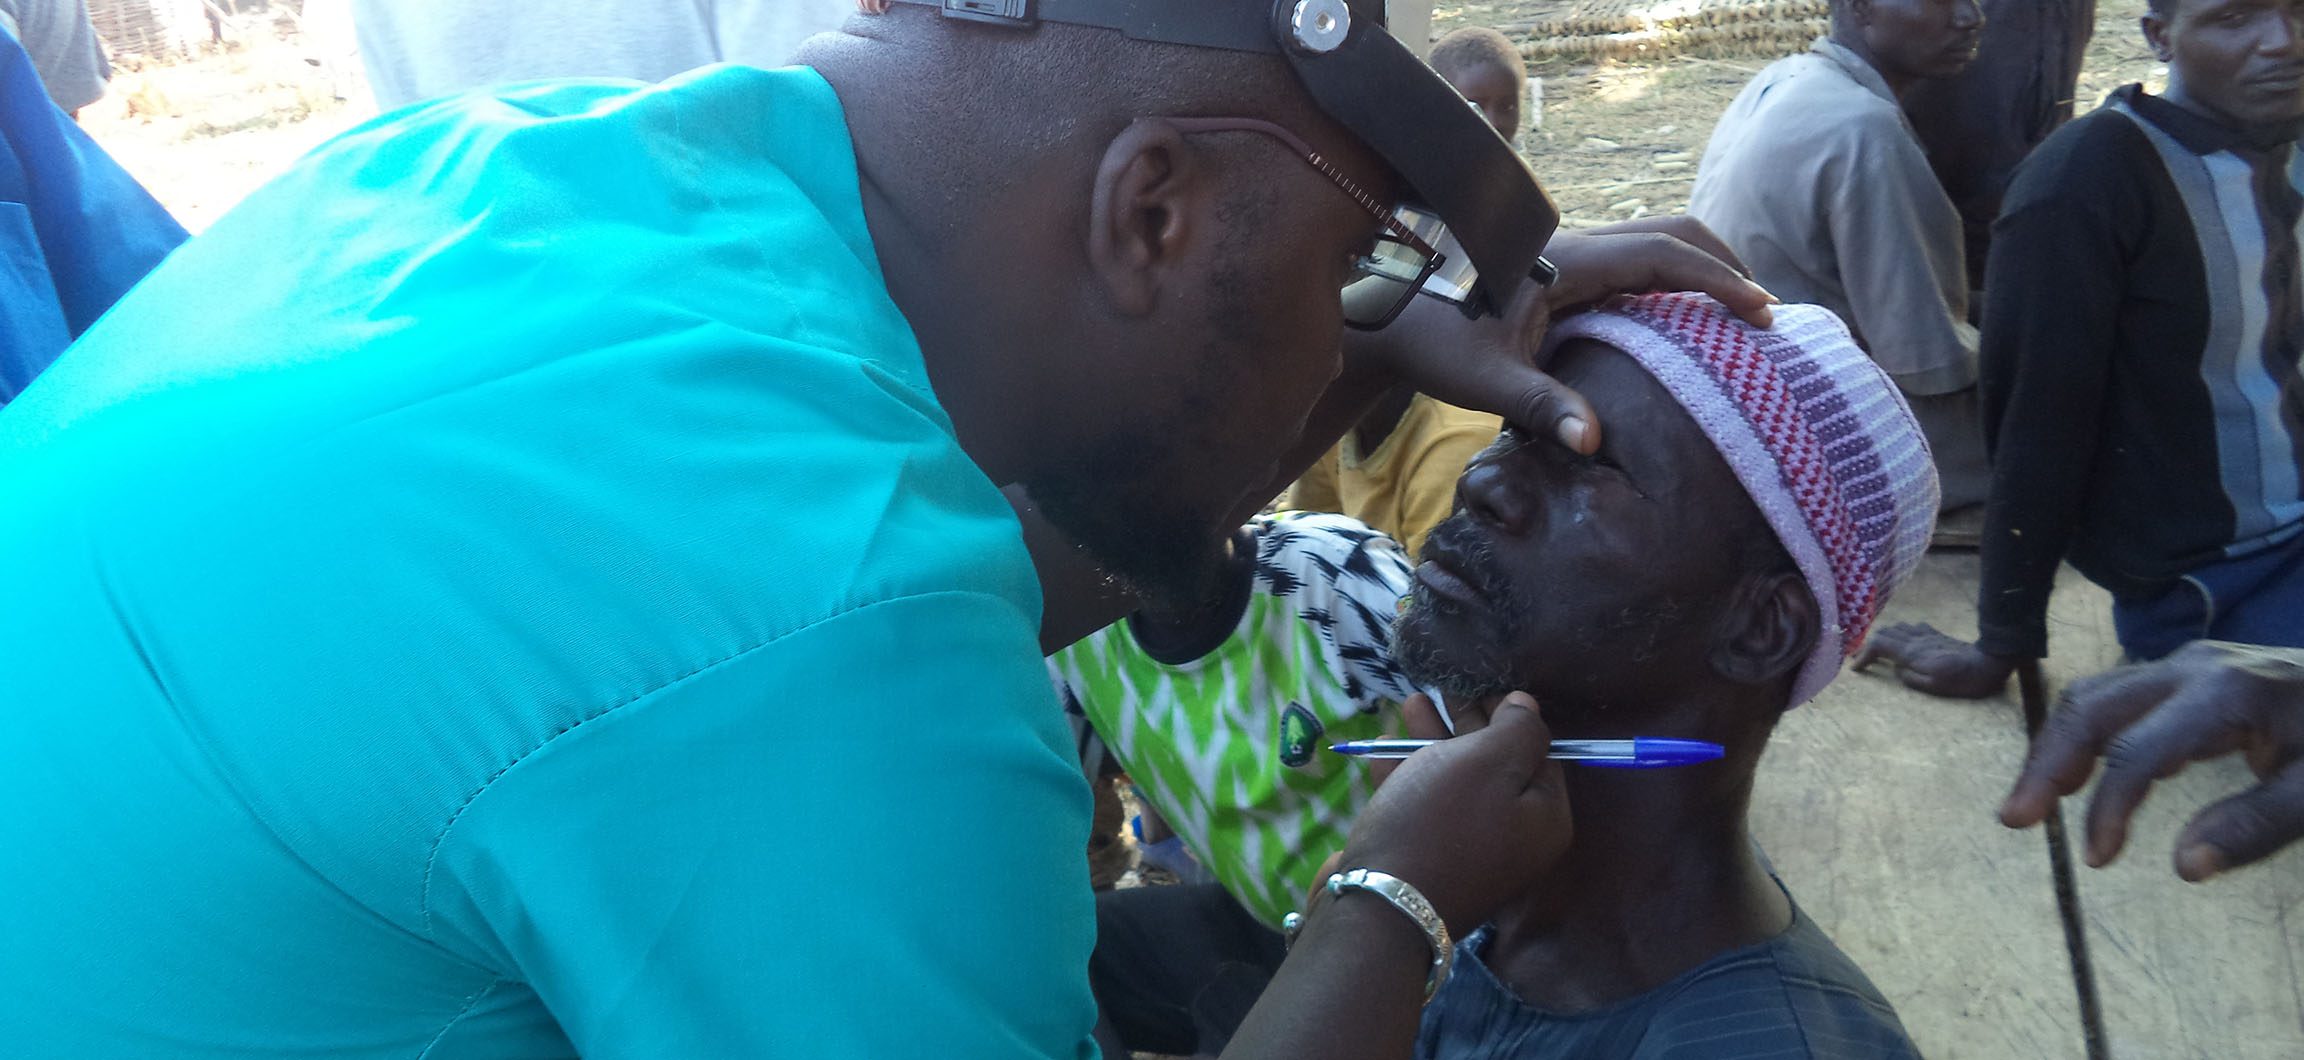 Health worker examines person for Trachoma.